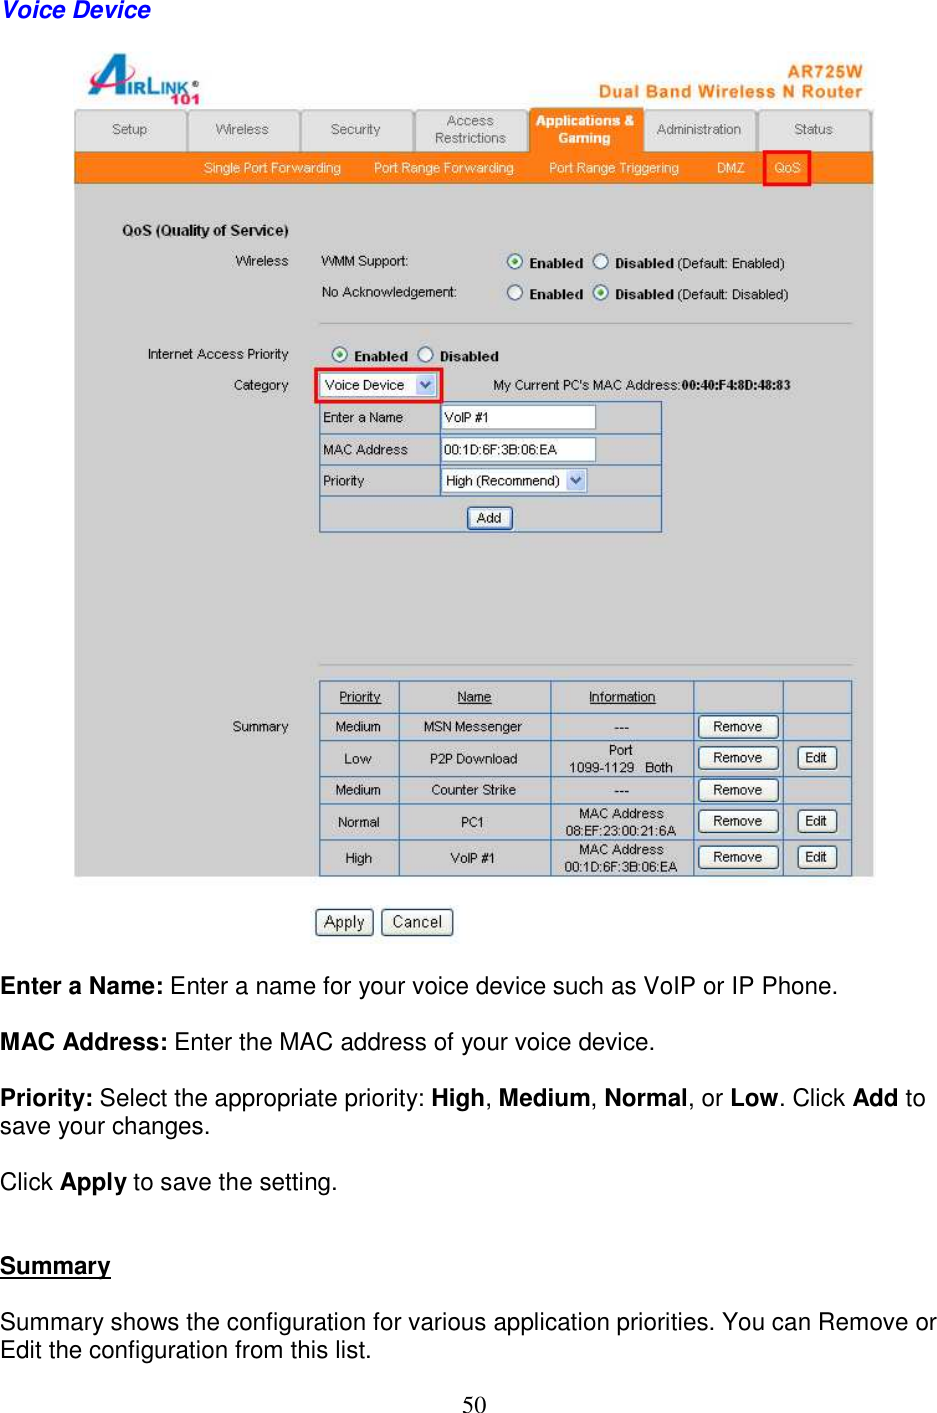 50 Voice Device     Enter a Name: Enter a name for your voice device such as VoIP or IP Phone.  MAC Address: Enter the MAC address of your voice device.  Priority: Select the appropriate priority: High, Medium, Normal, or Low. Click Add to save your changes.   Click Apply to save the setting.   Summary  Summary shows the configuration for various application priorities. You can Remove or Edit the configuration from this list. 